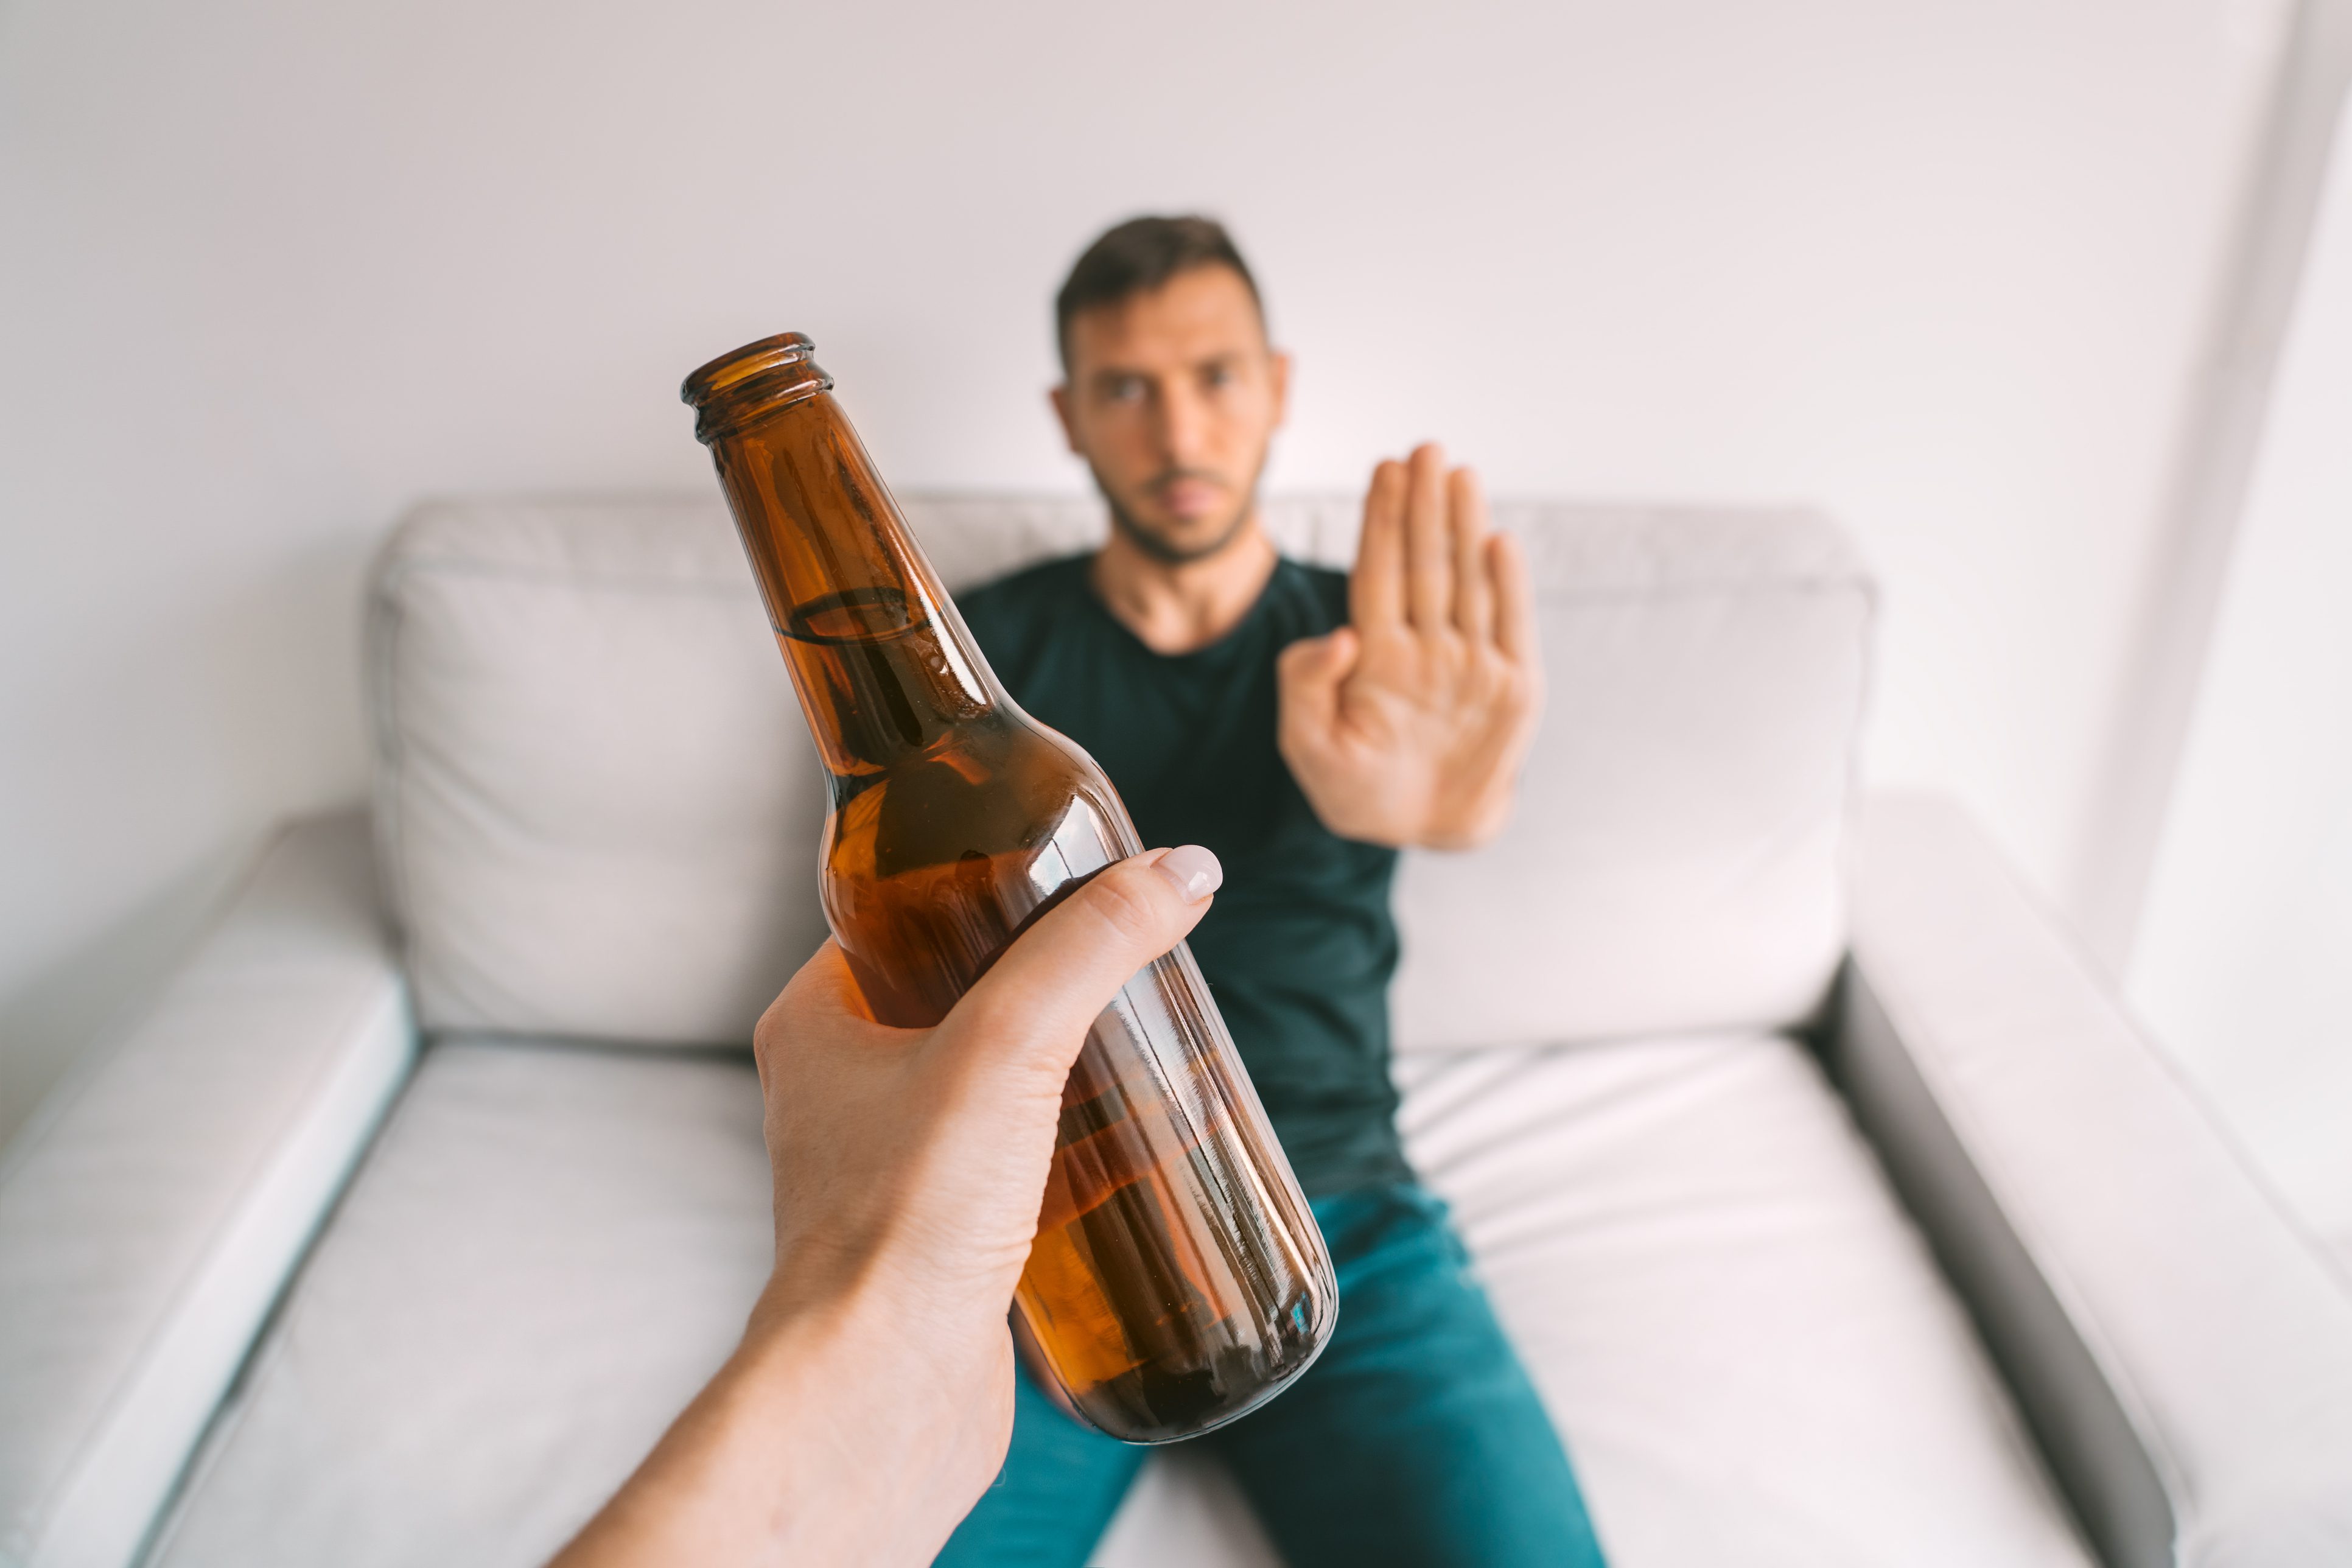 How Big Of A Deal Is Putting 'No' To Drinking On Dating Apps?